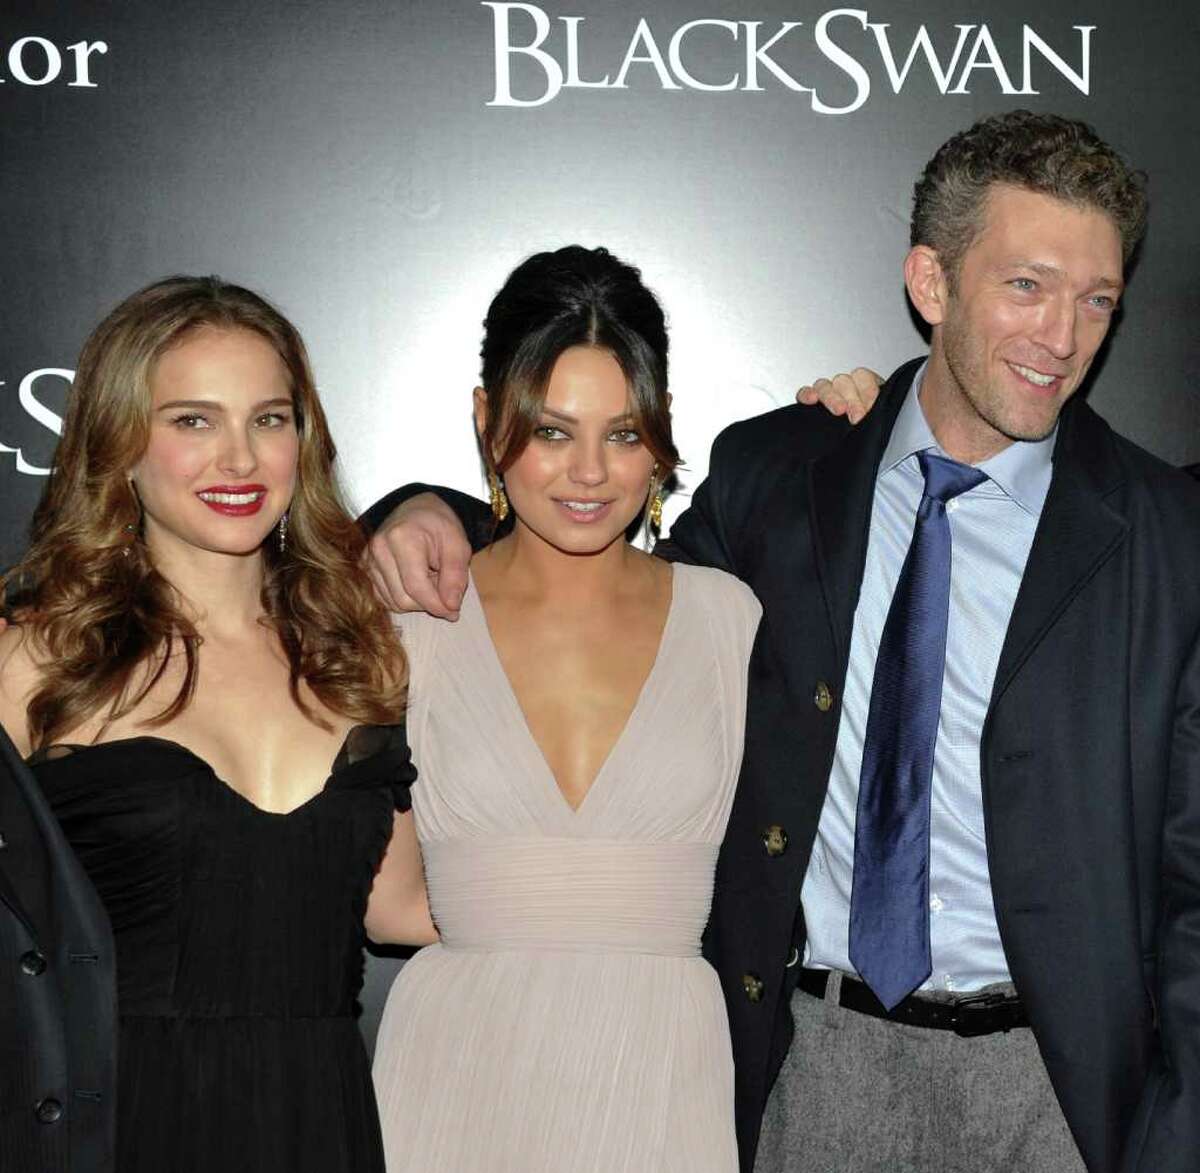 Actress Natalie Portman, left, actress Mila Kunis and actor Vincent Cassel, right, attend the premiere of 'Black Swan' at the Ziegfeld Theatre on Tuesday, Nov. 30, 2010 in New York. (AP Photo/Evan Agostini)